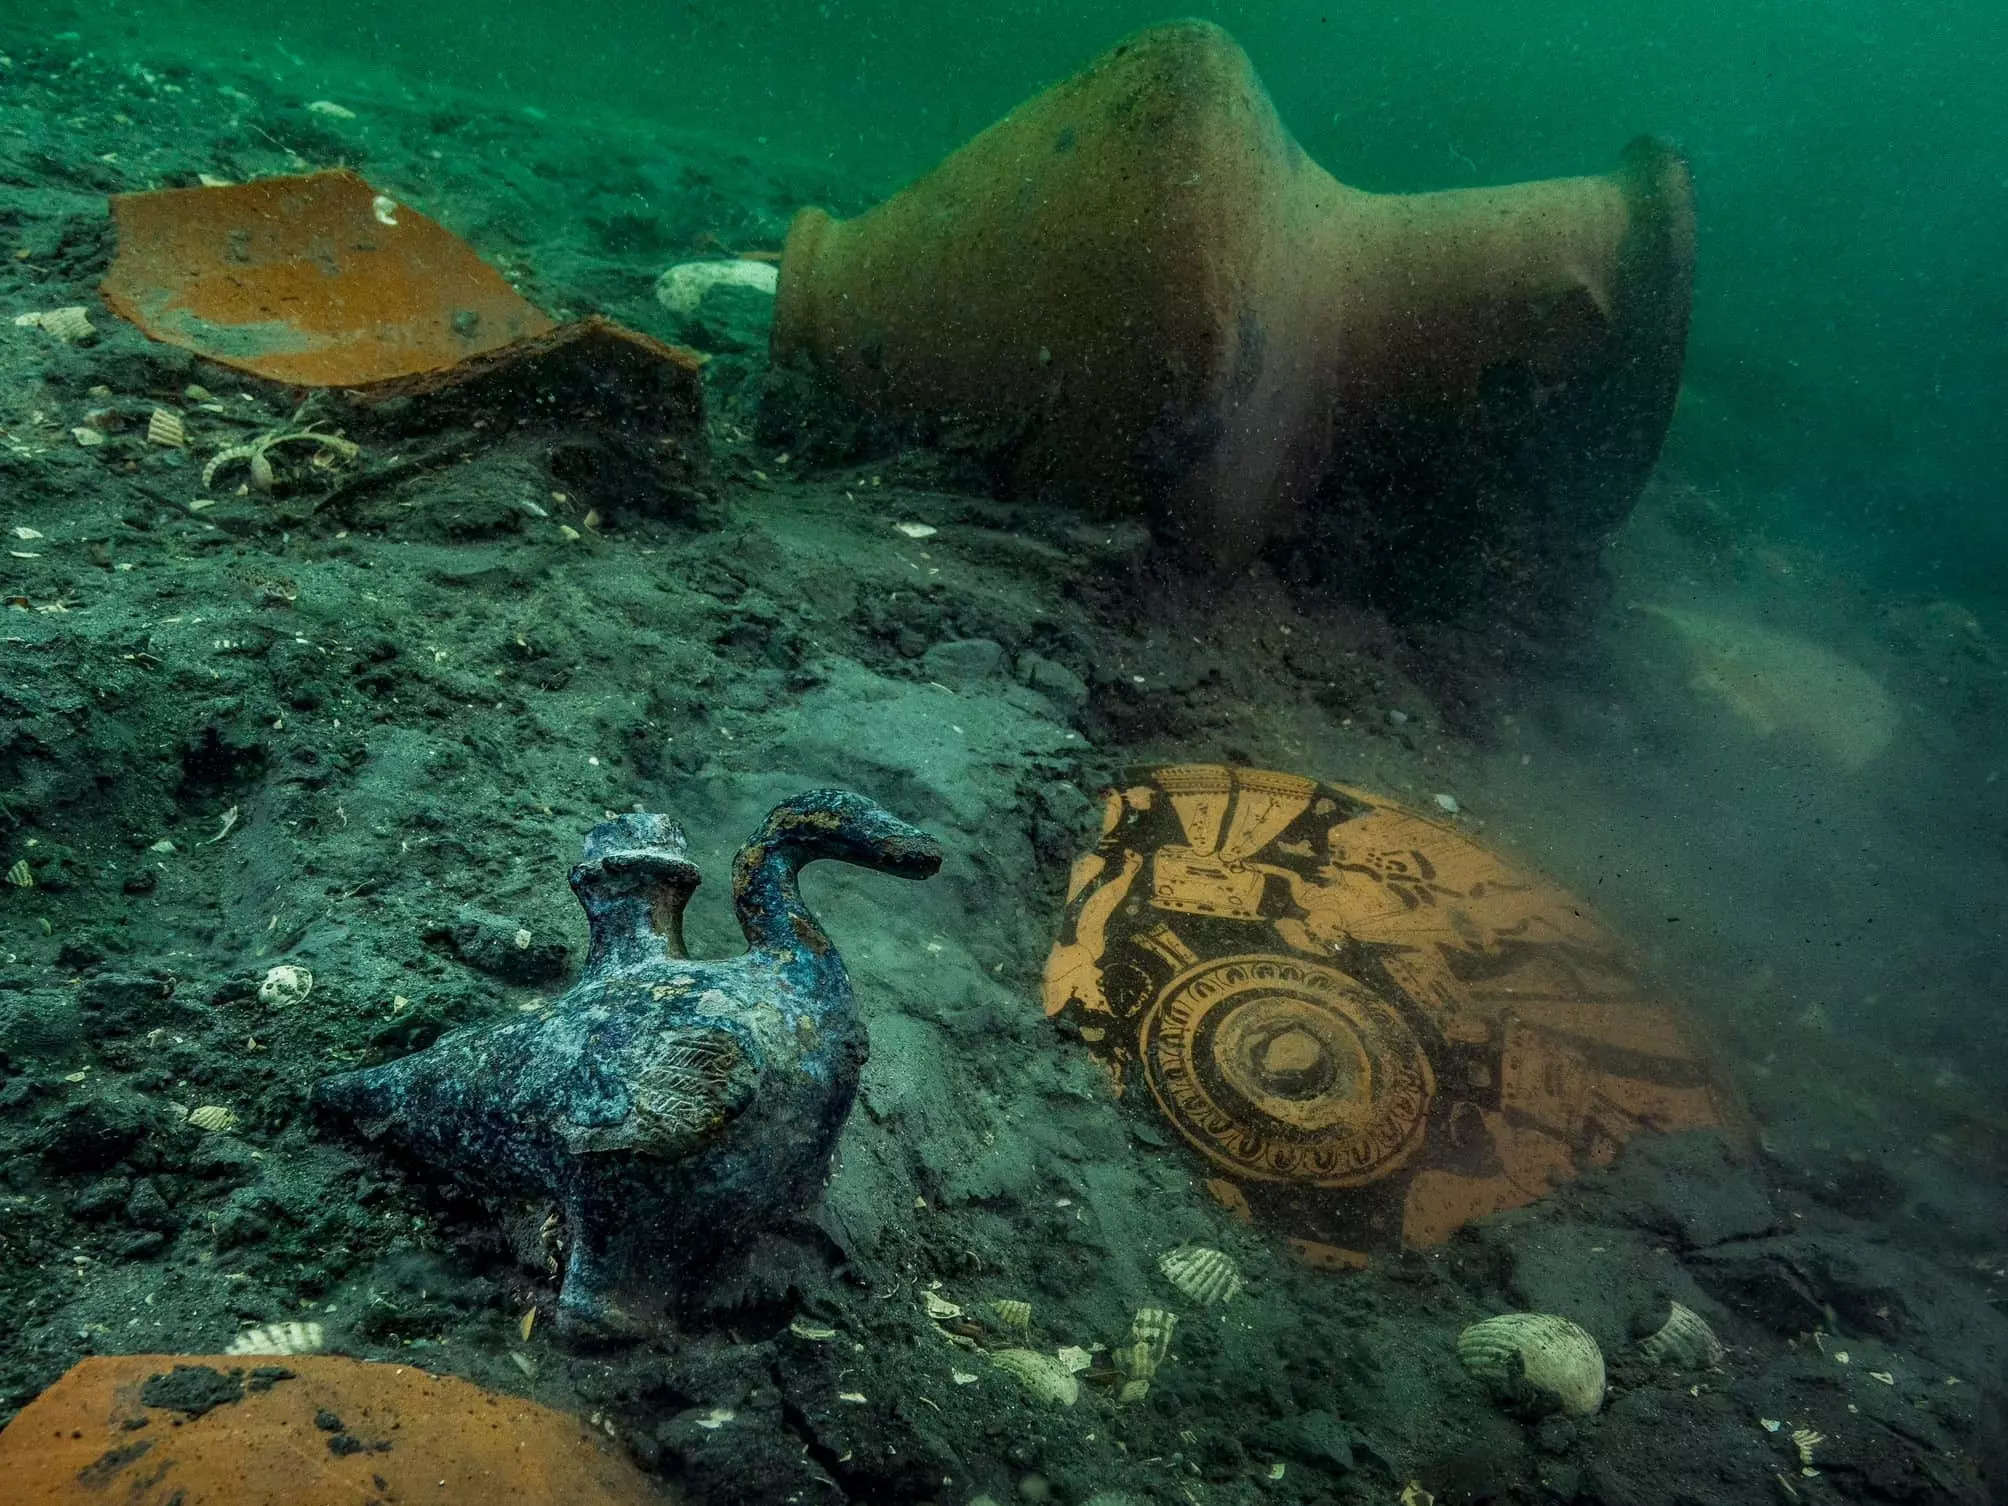 A picture shows a Grecian vase, bronze shield, buried in mud underwater.